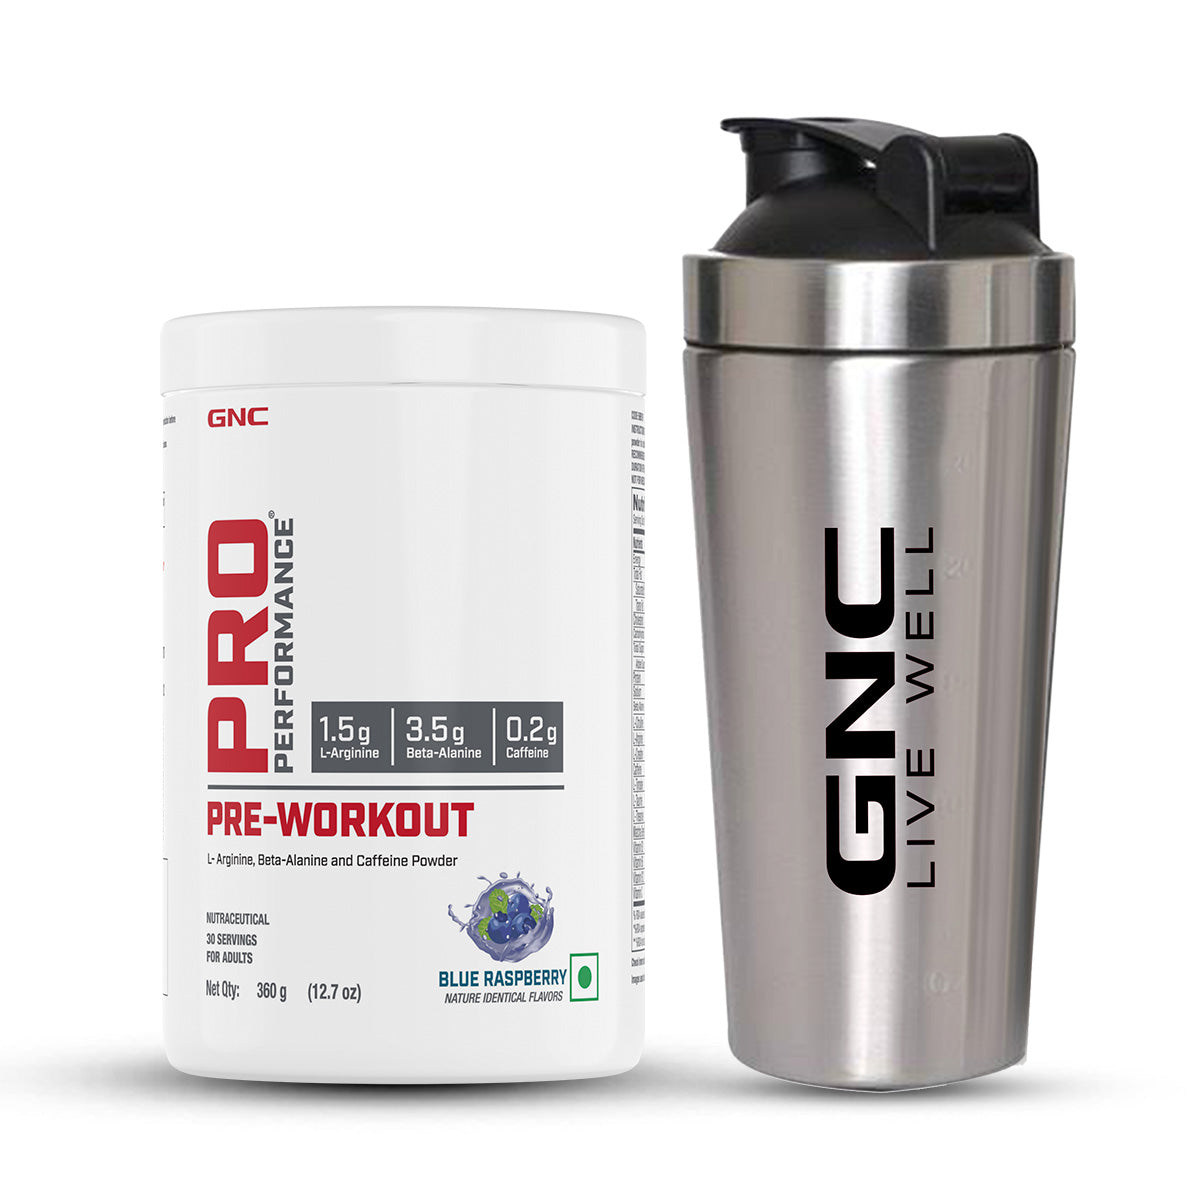 GNC Pro Performance Pre-Workout With Shaker - Helps Improve Energy to Support Intense Workout